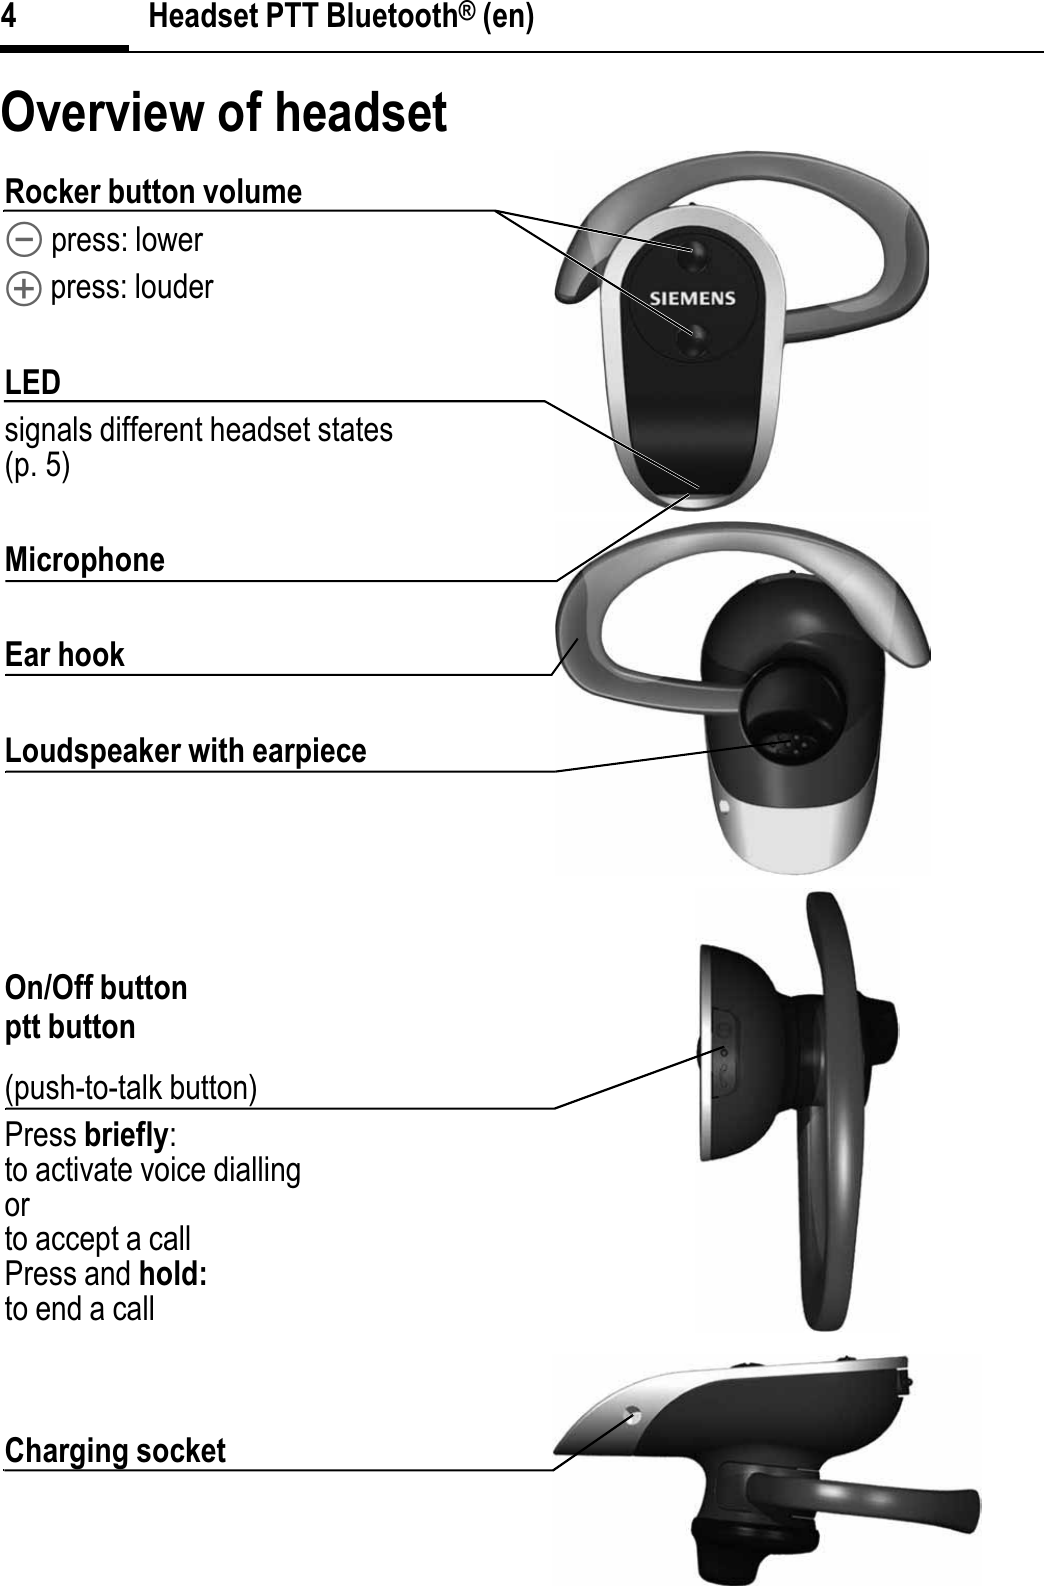 Headset PTT Bluetooth® (en)4Overview of headsetRocker button volume\ press: lower[ press: louderLEDsignals different headset states (p. 5)MicrophoneEar hookLoudspeaker with earpieceOn/Off buttonptt button(push-to-talk button)Press briefly:to activate voice diallingorto accept a callPress and hold:to end a callCharging socket